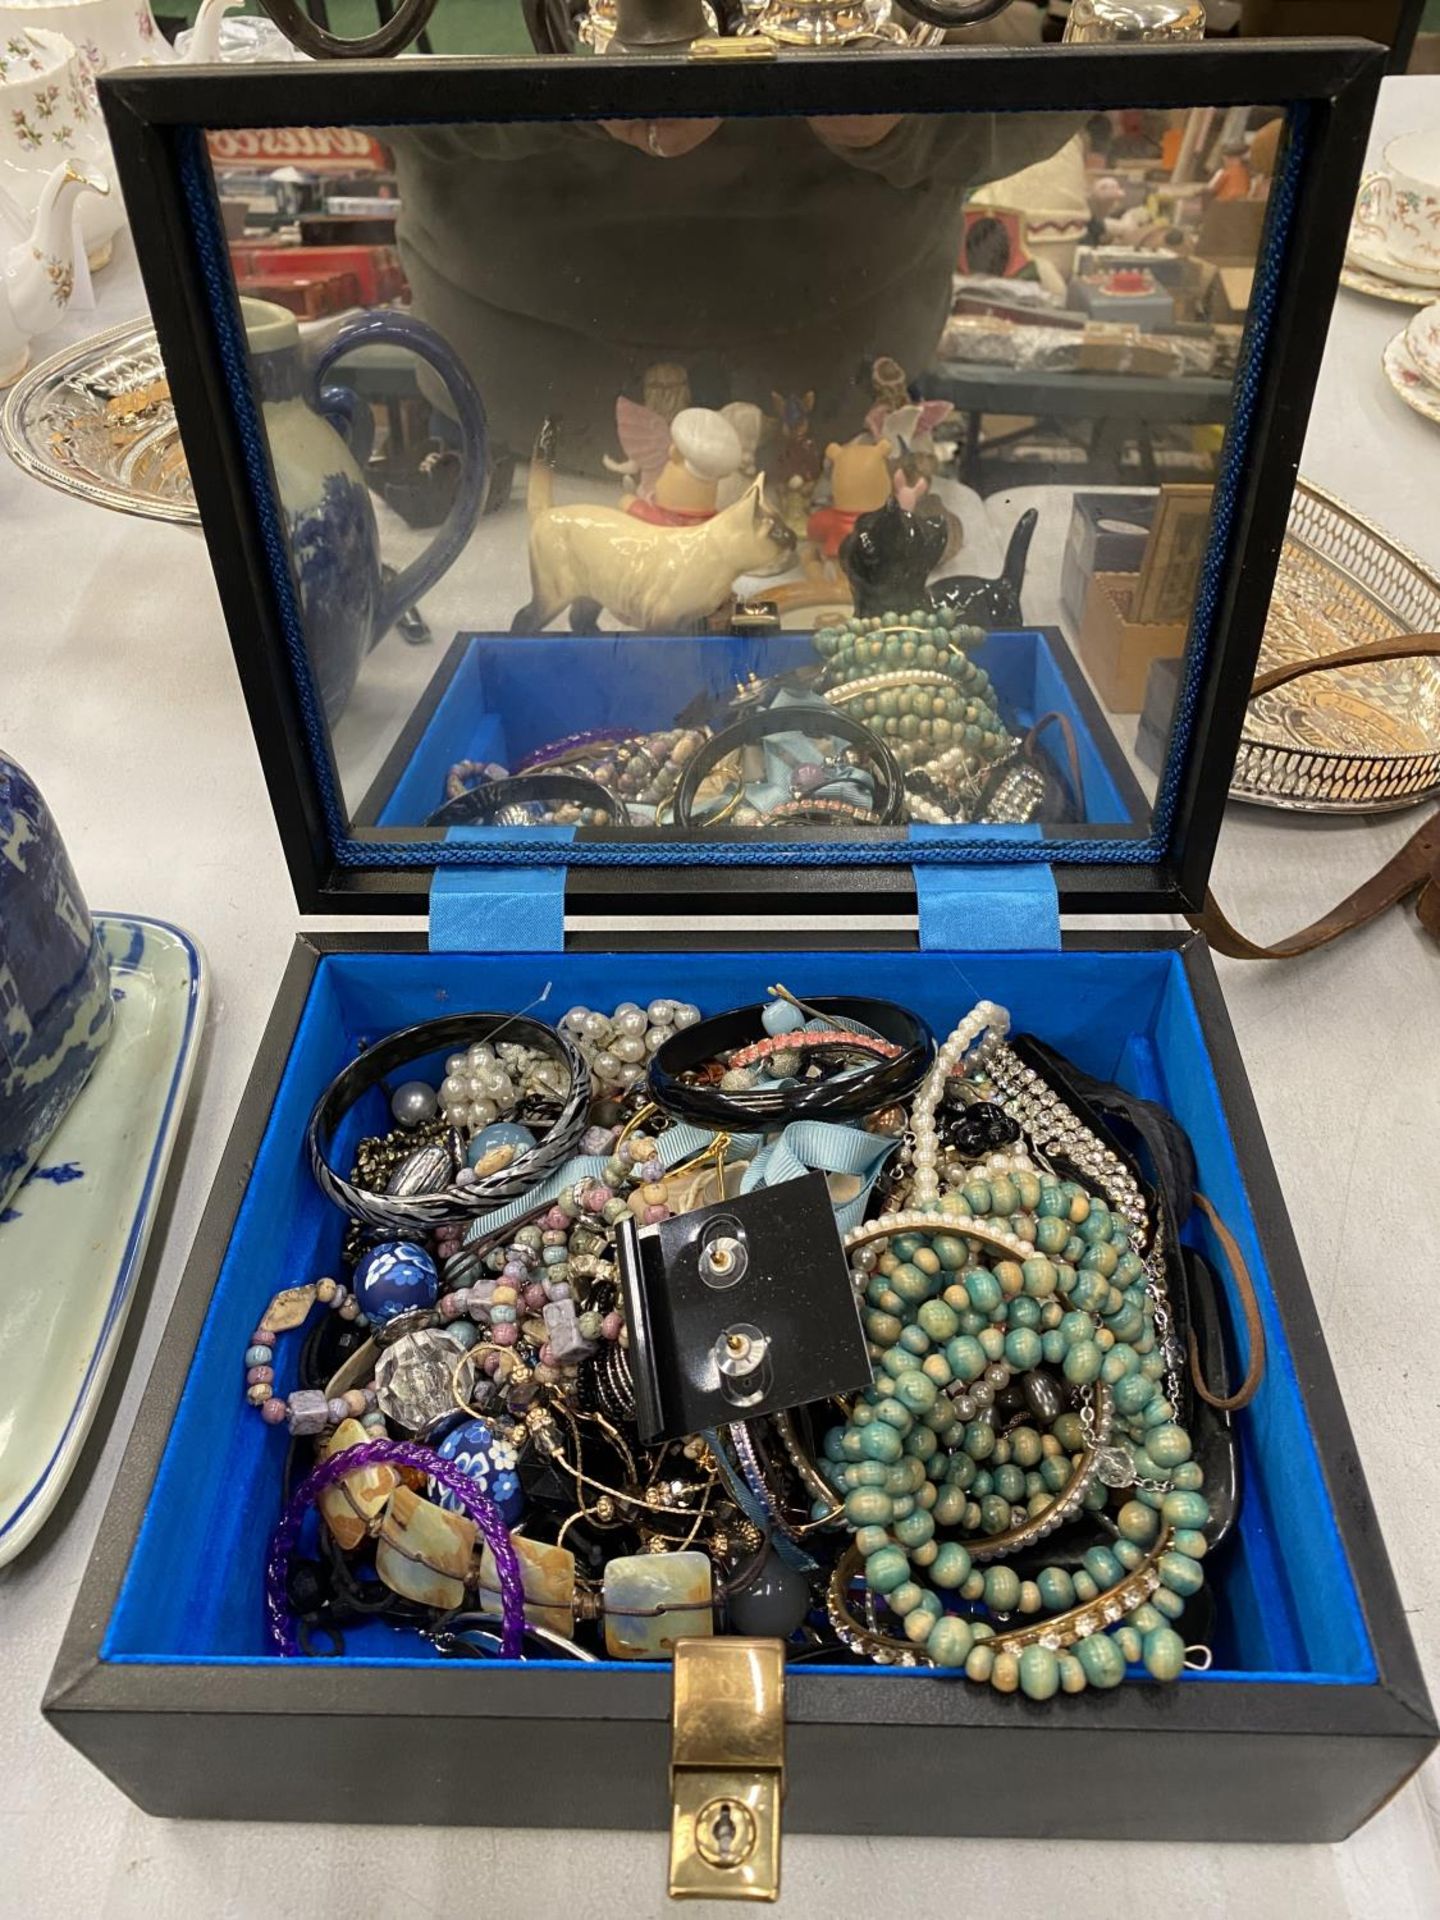 A MIRRORED JEWELLERY BOX WITH CONTENTS INCLUDING BANGLES, BEADS, NECKLACES, EARRINGS, ETC - Image 5 of 6